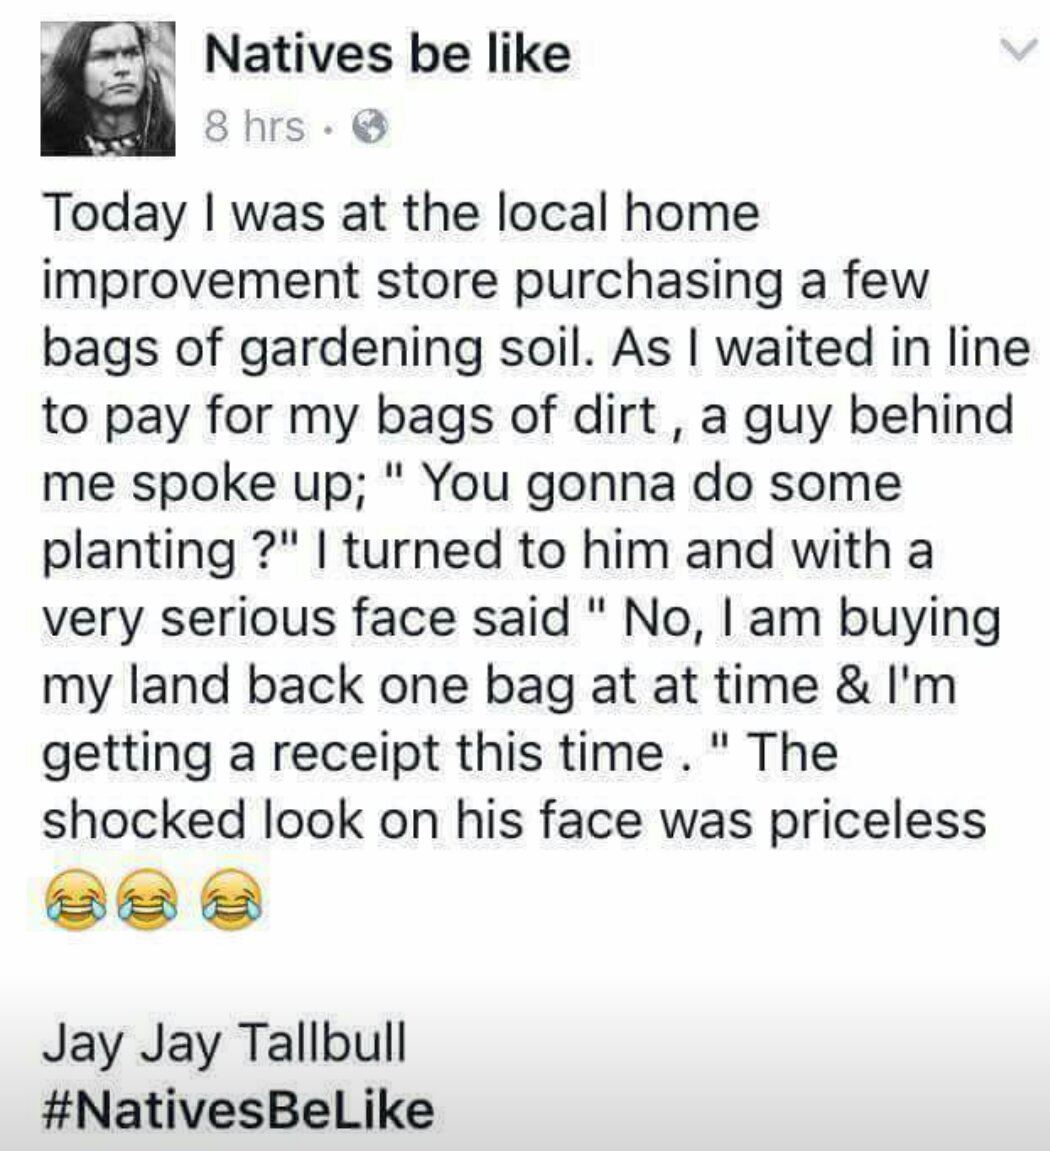 native american joke meme - Natives be 8 hrs. Today I was at the local home improvement store purchasing a few bags of gardening soil. As I waited in line to pay for my bags of dirt, a guy behind me spoke up; " You gonna do some planting ?" I turned to hi